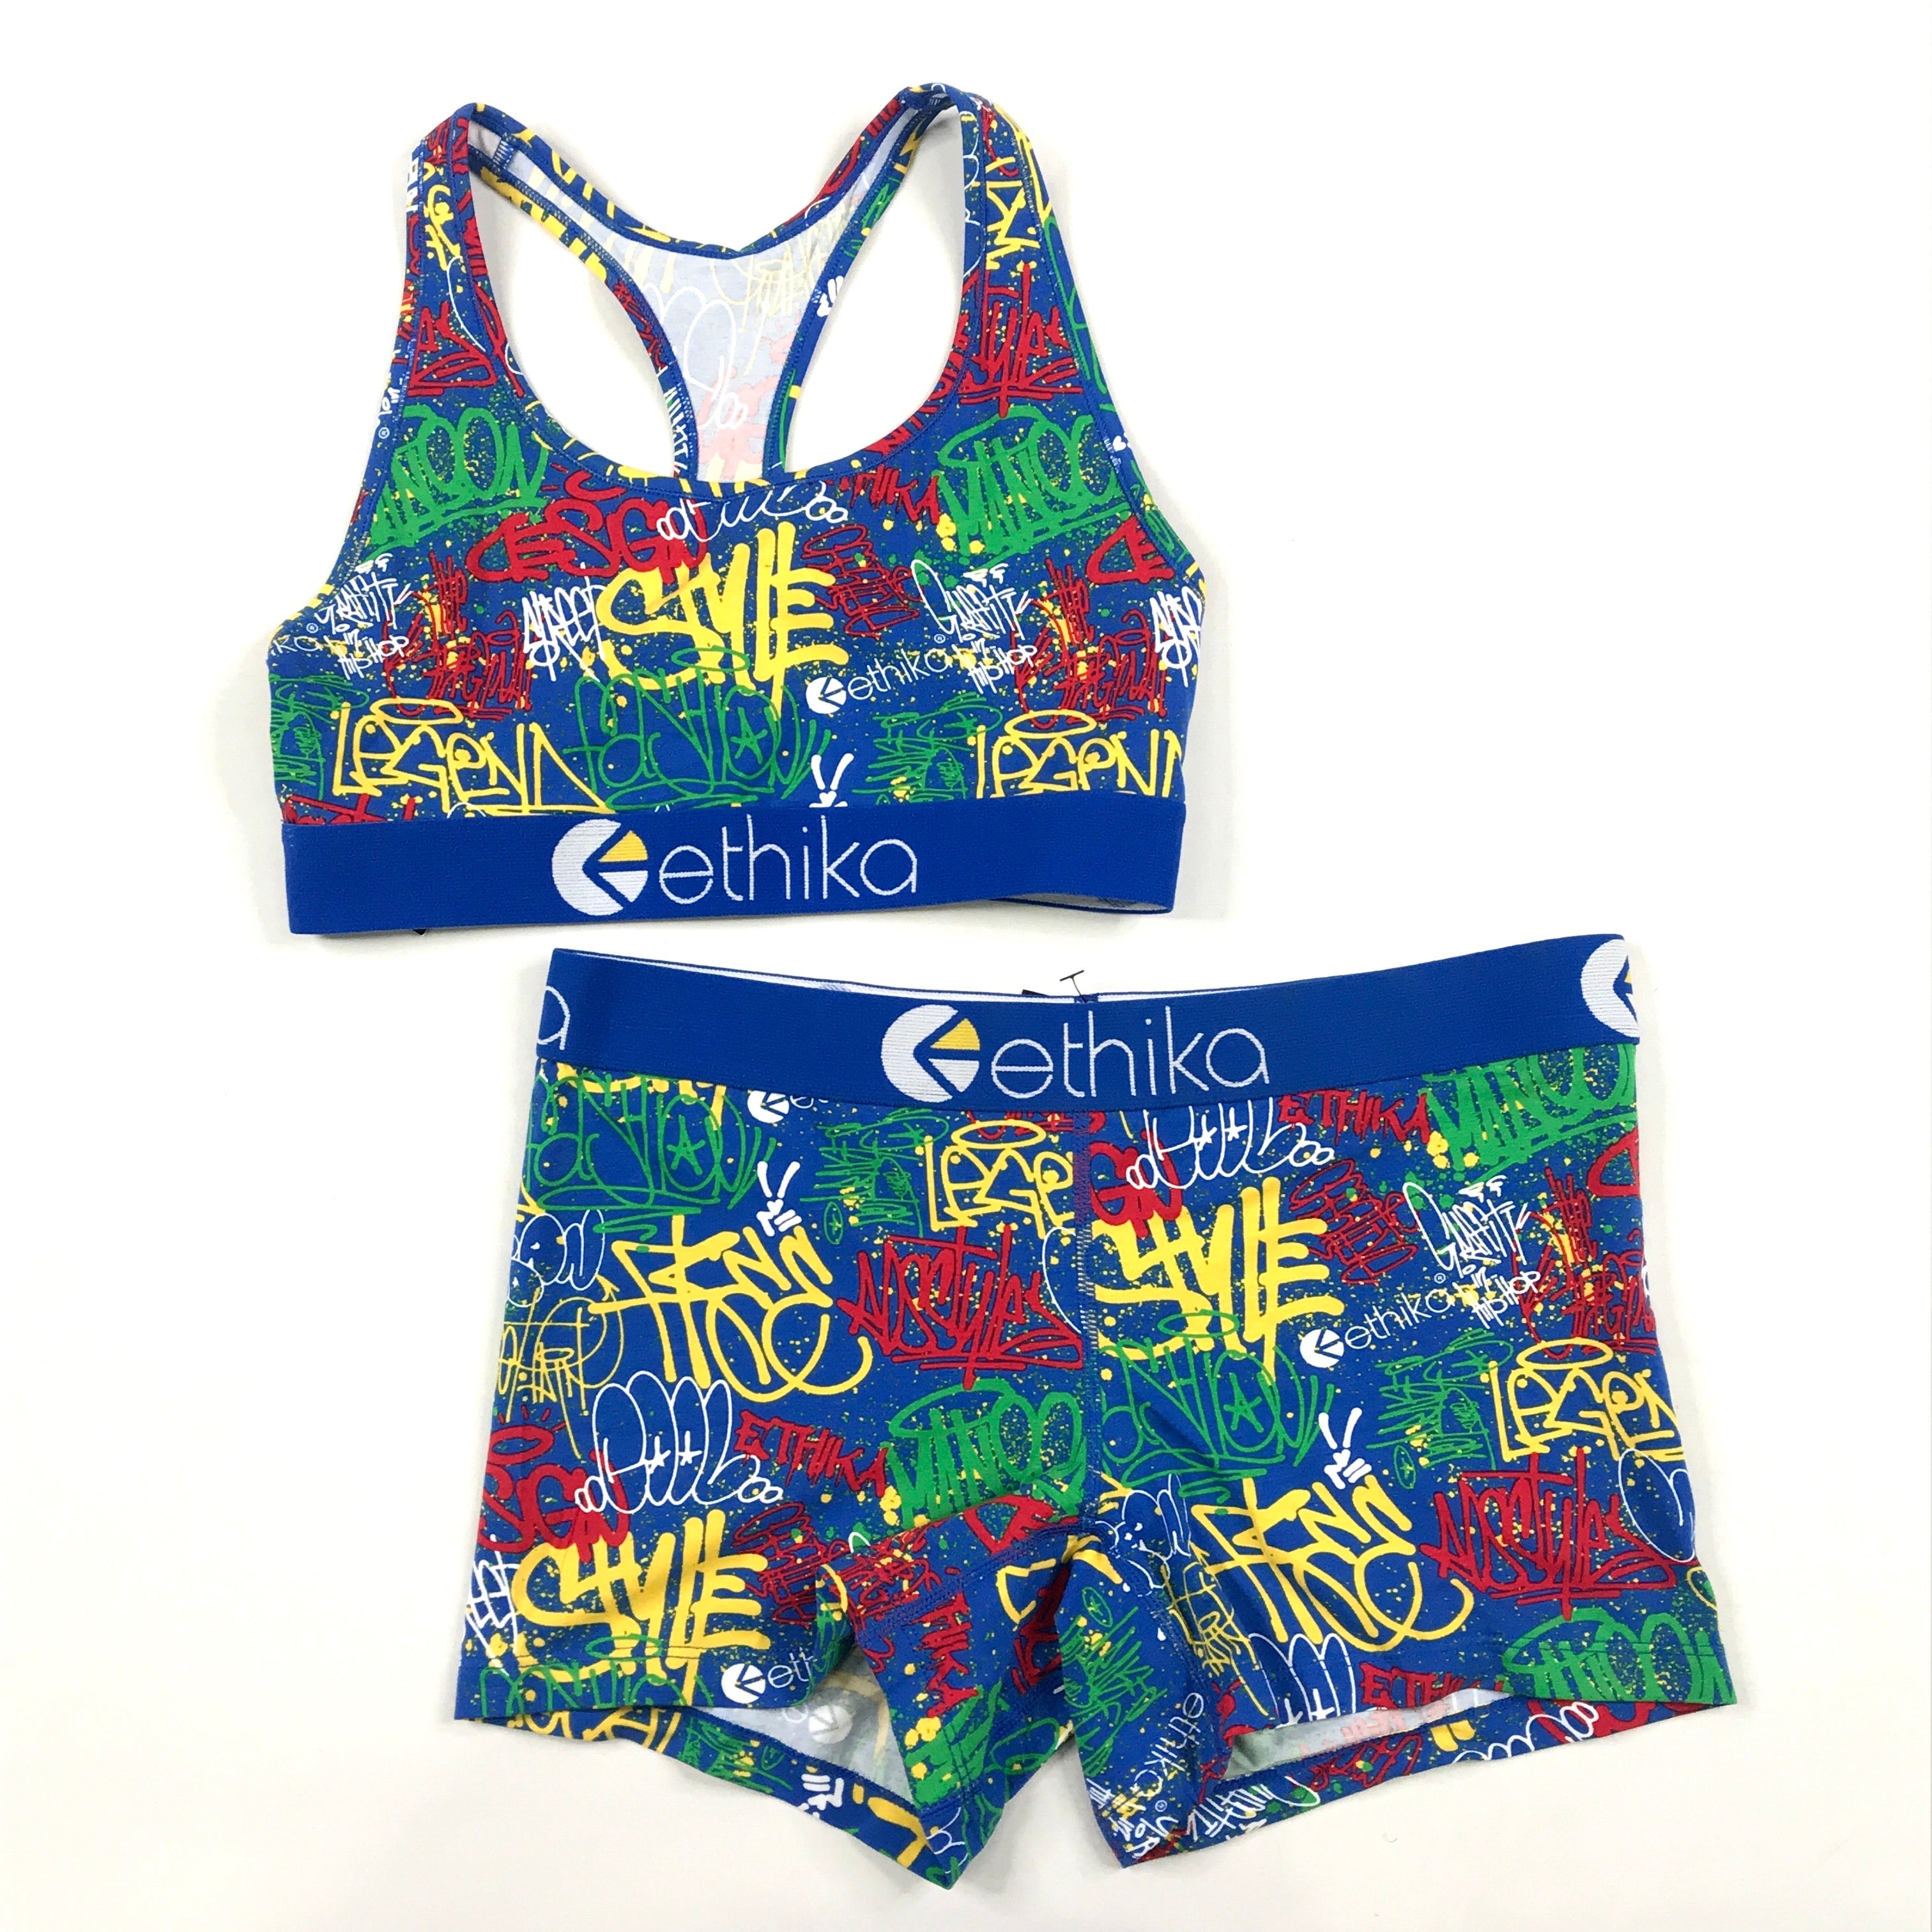 Ethika Staple boxer brief and sports bra set in Expression Session (wl –  R.O.K. Island Clothing